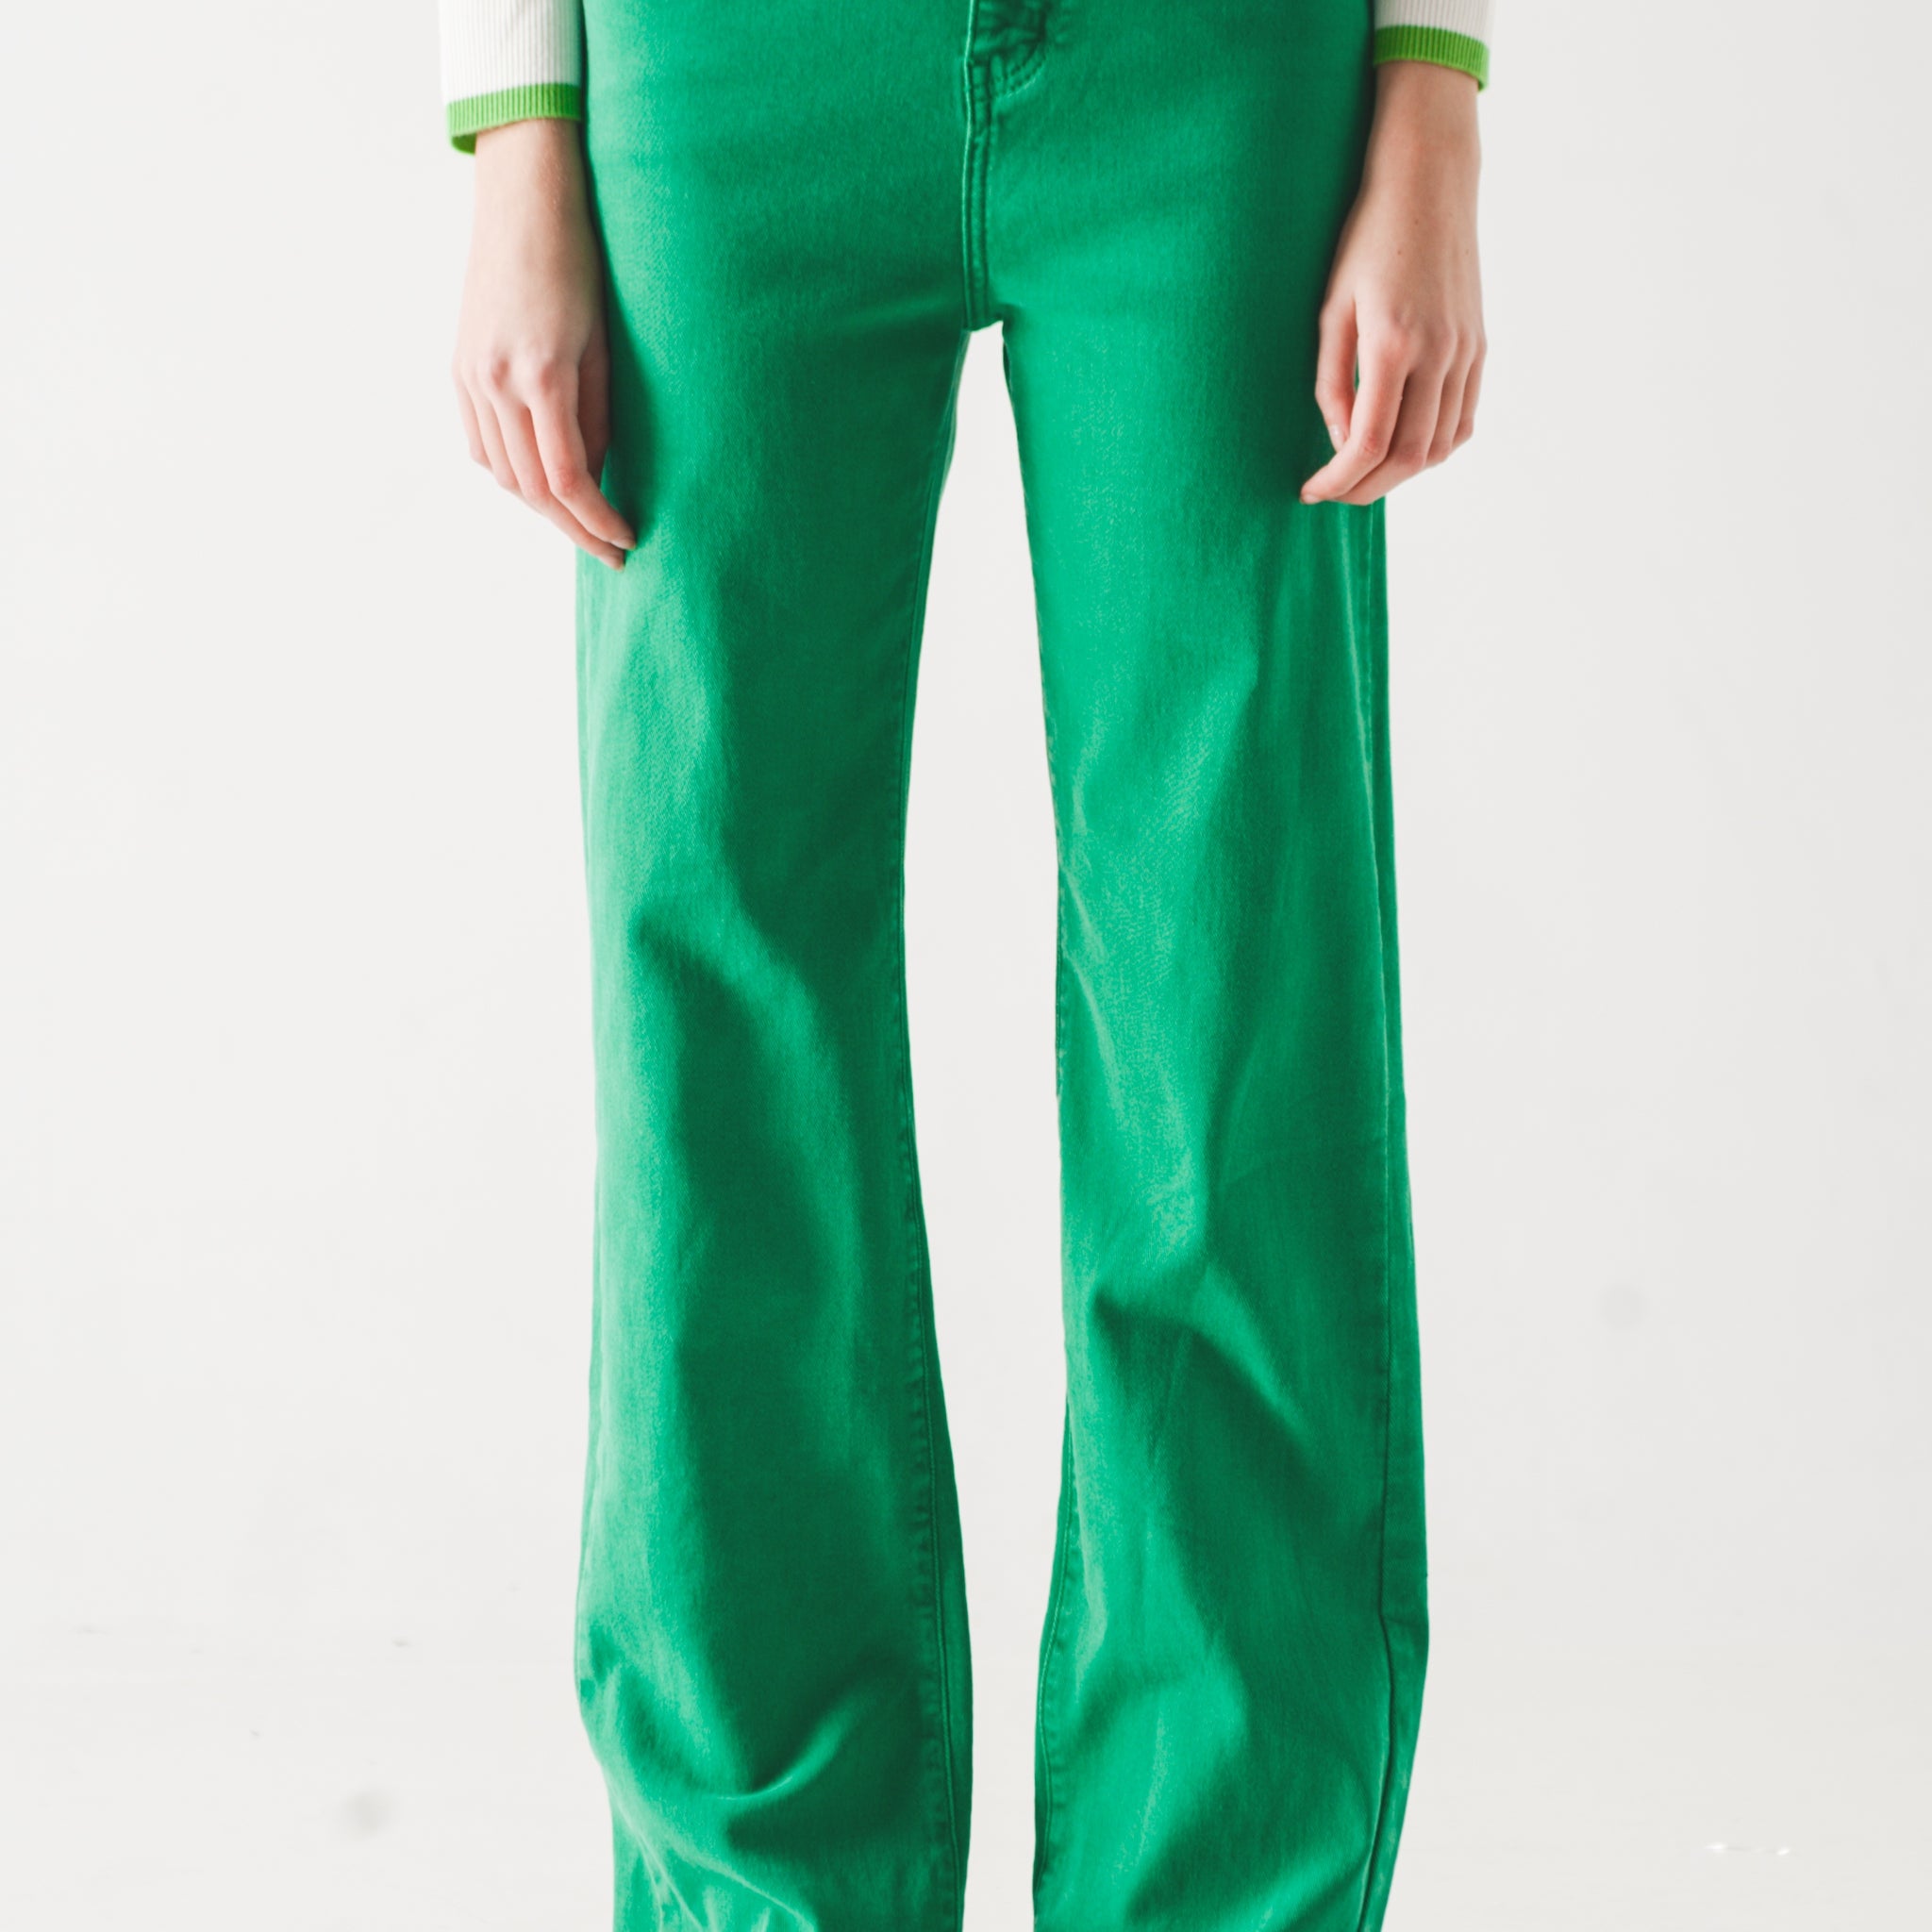 Q2 High waisted slouchy mom jeans in green